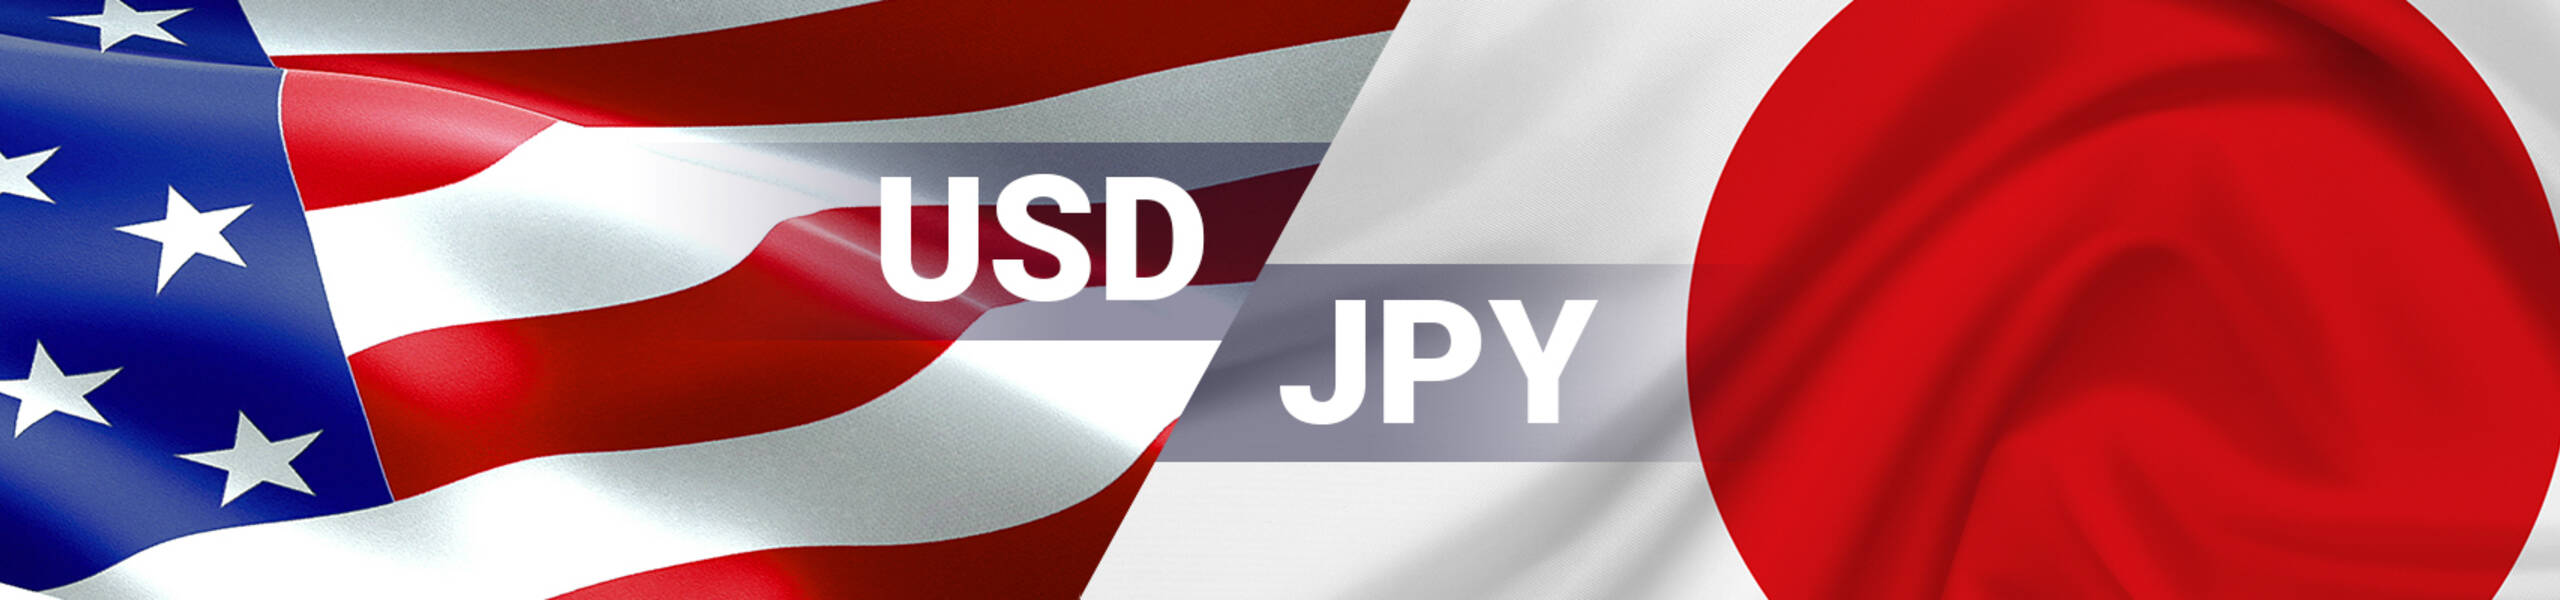 FX:為替 USD/JPY Dailyレポート 2017/06/09